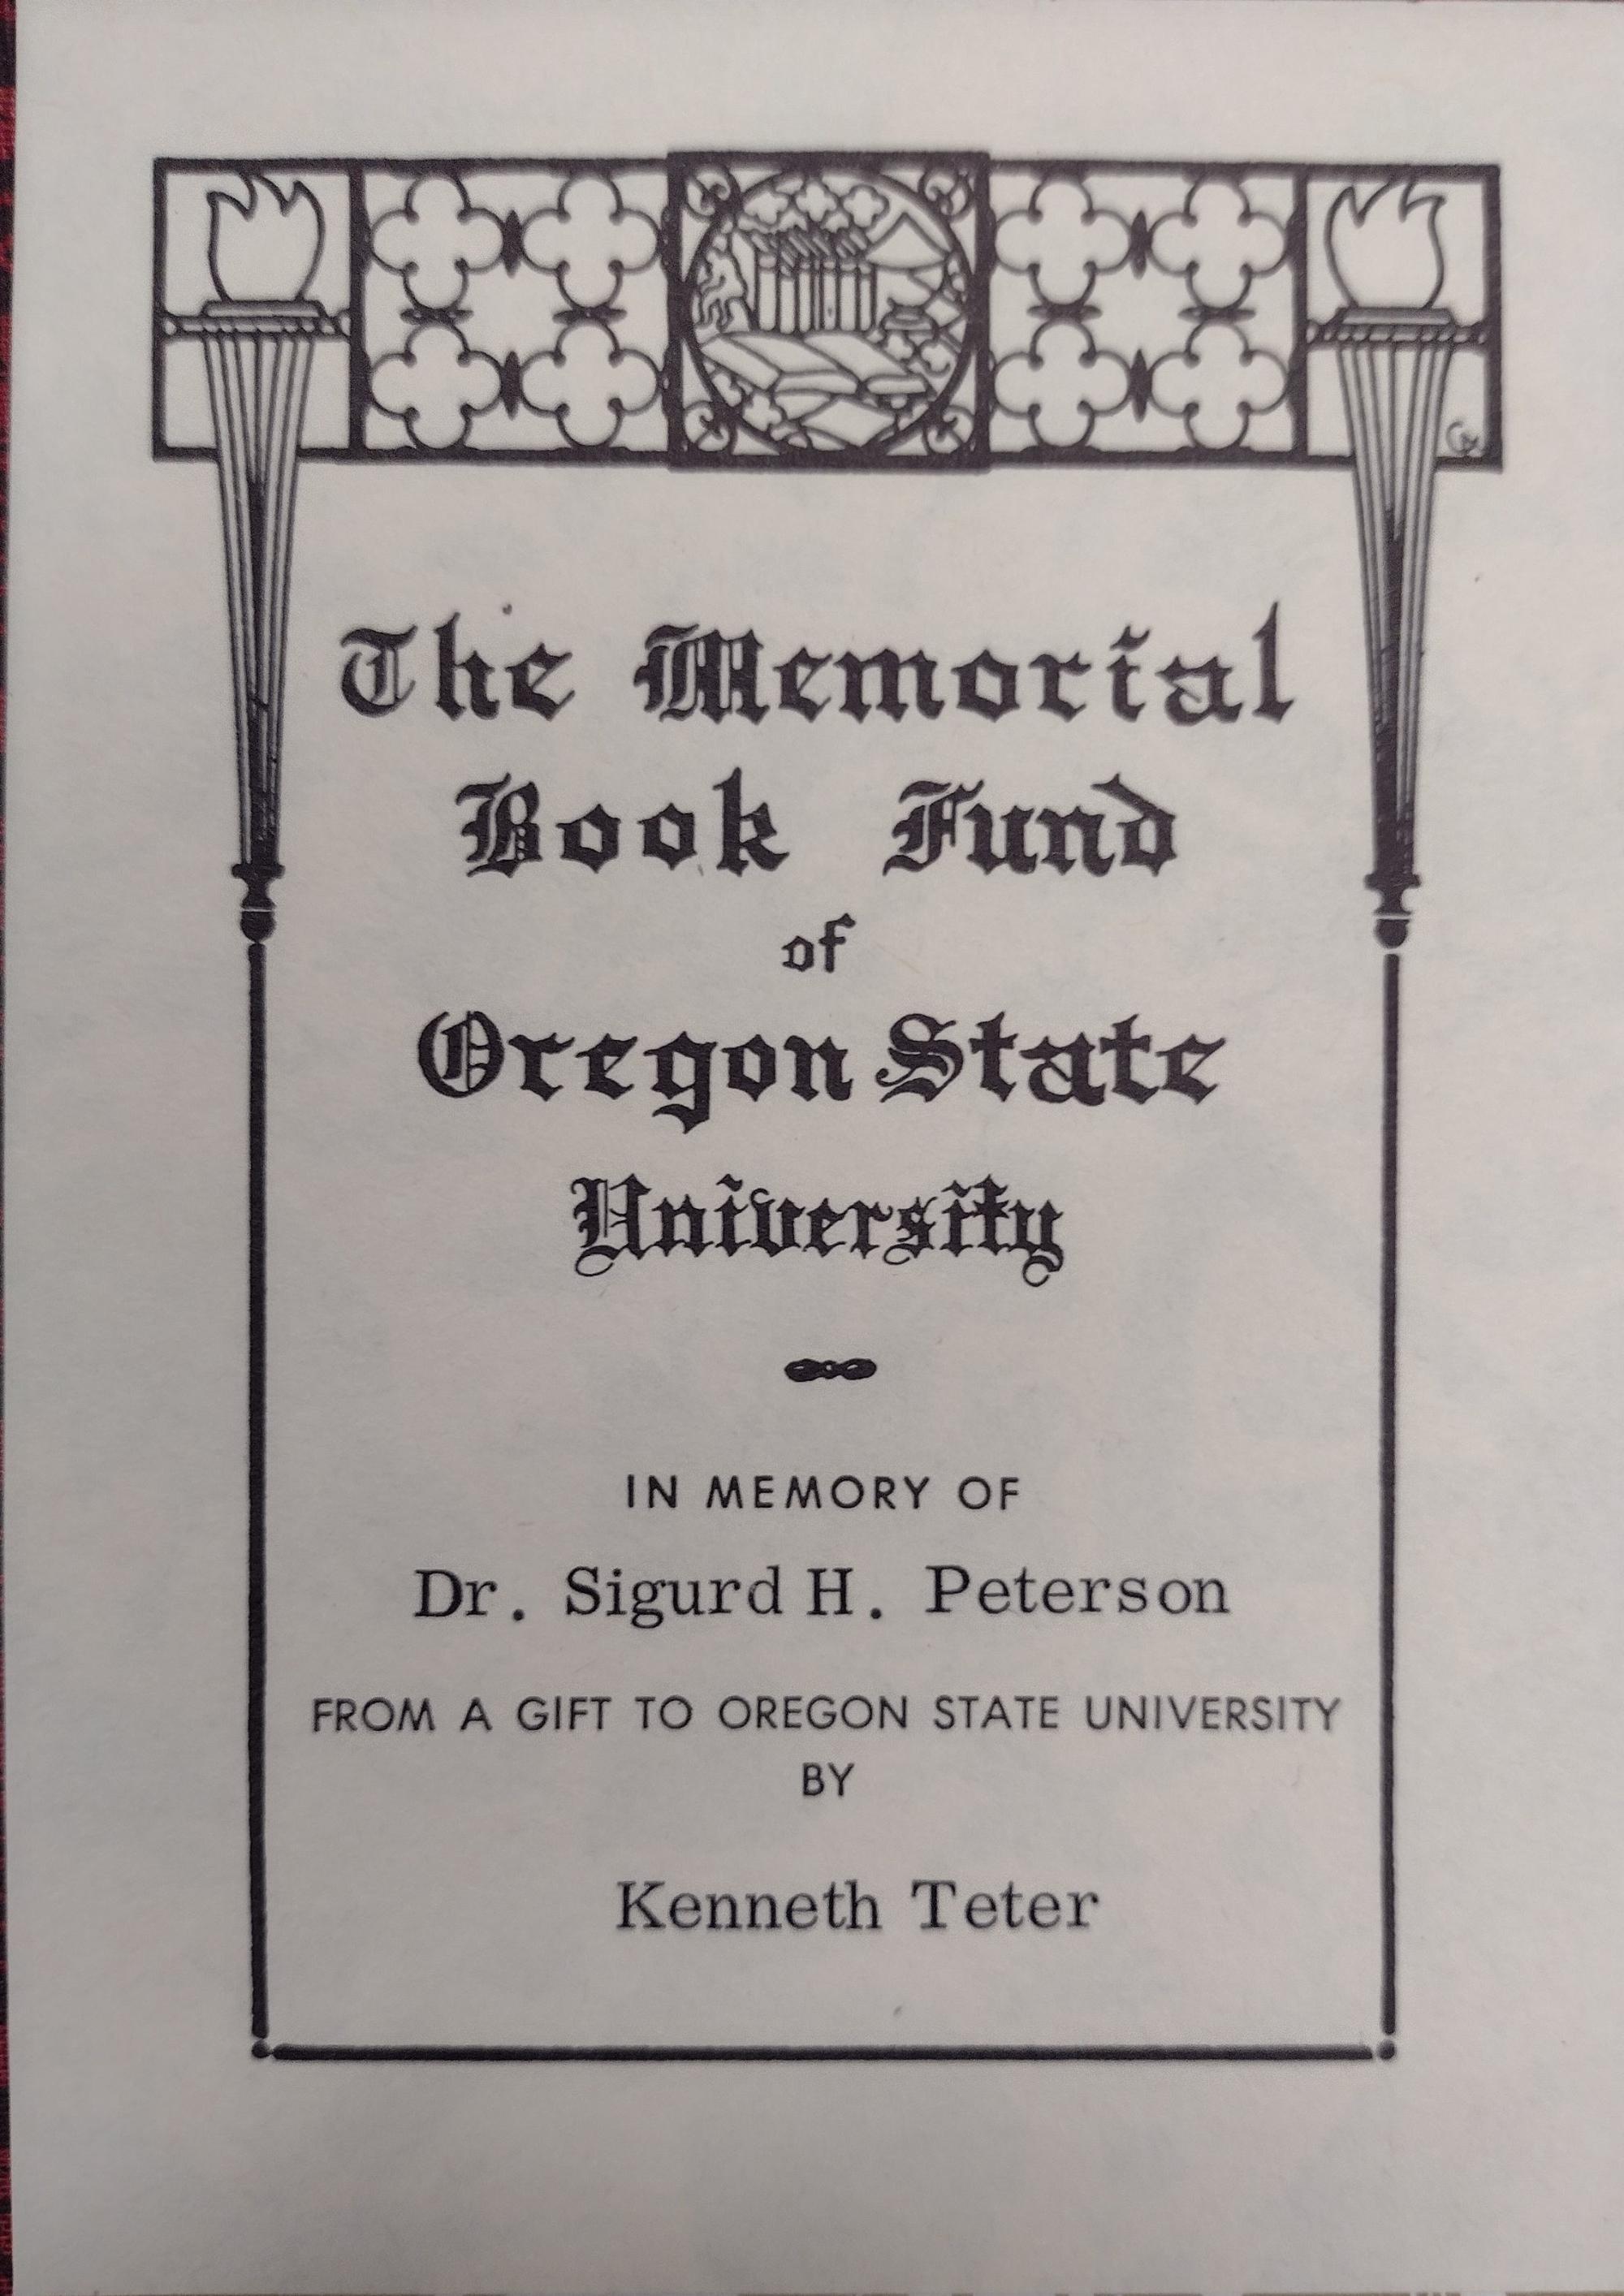 bookplate on inside front cover, "The Memorial Book Fund of Oregon state University / in memory of Dr. Sigurd H. Peterson from a gift to Oregon State University by Kenneth Teter"